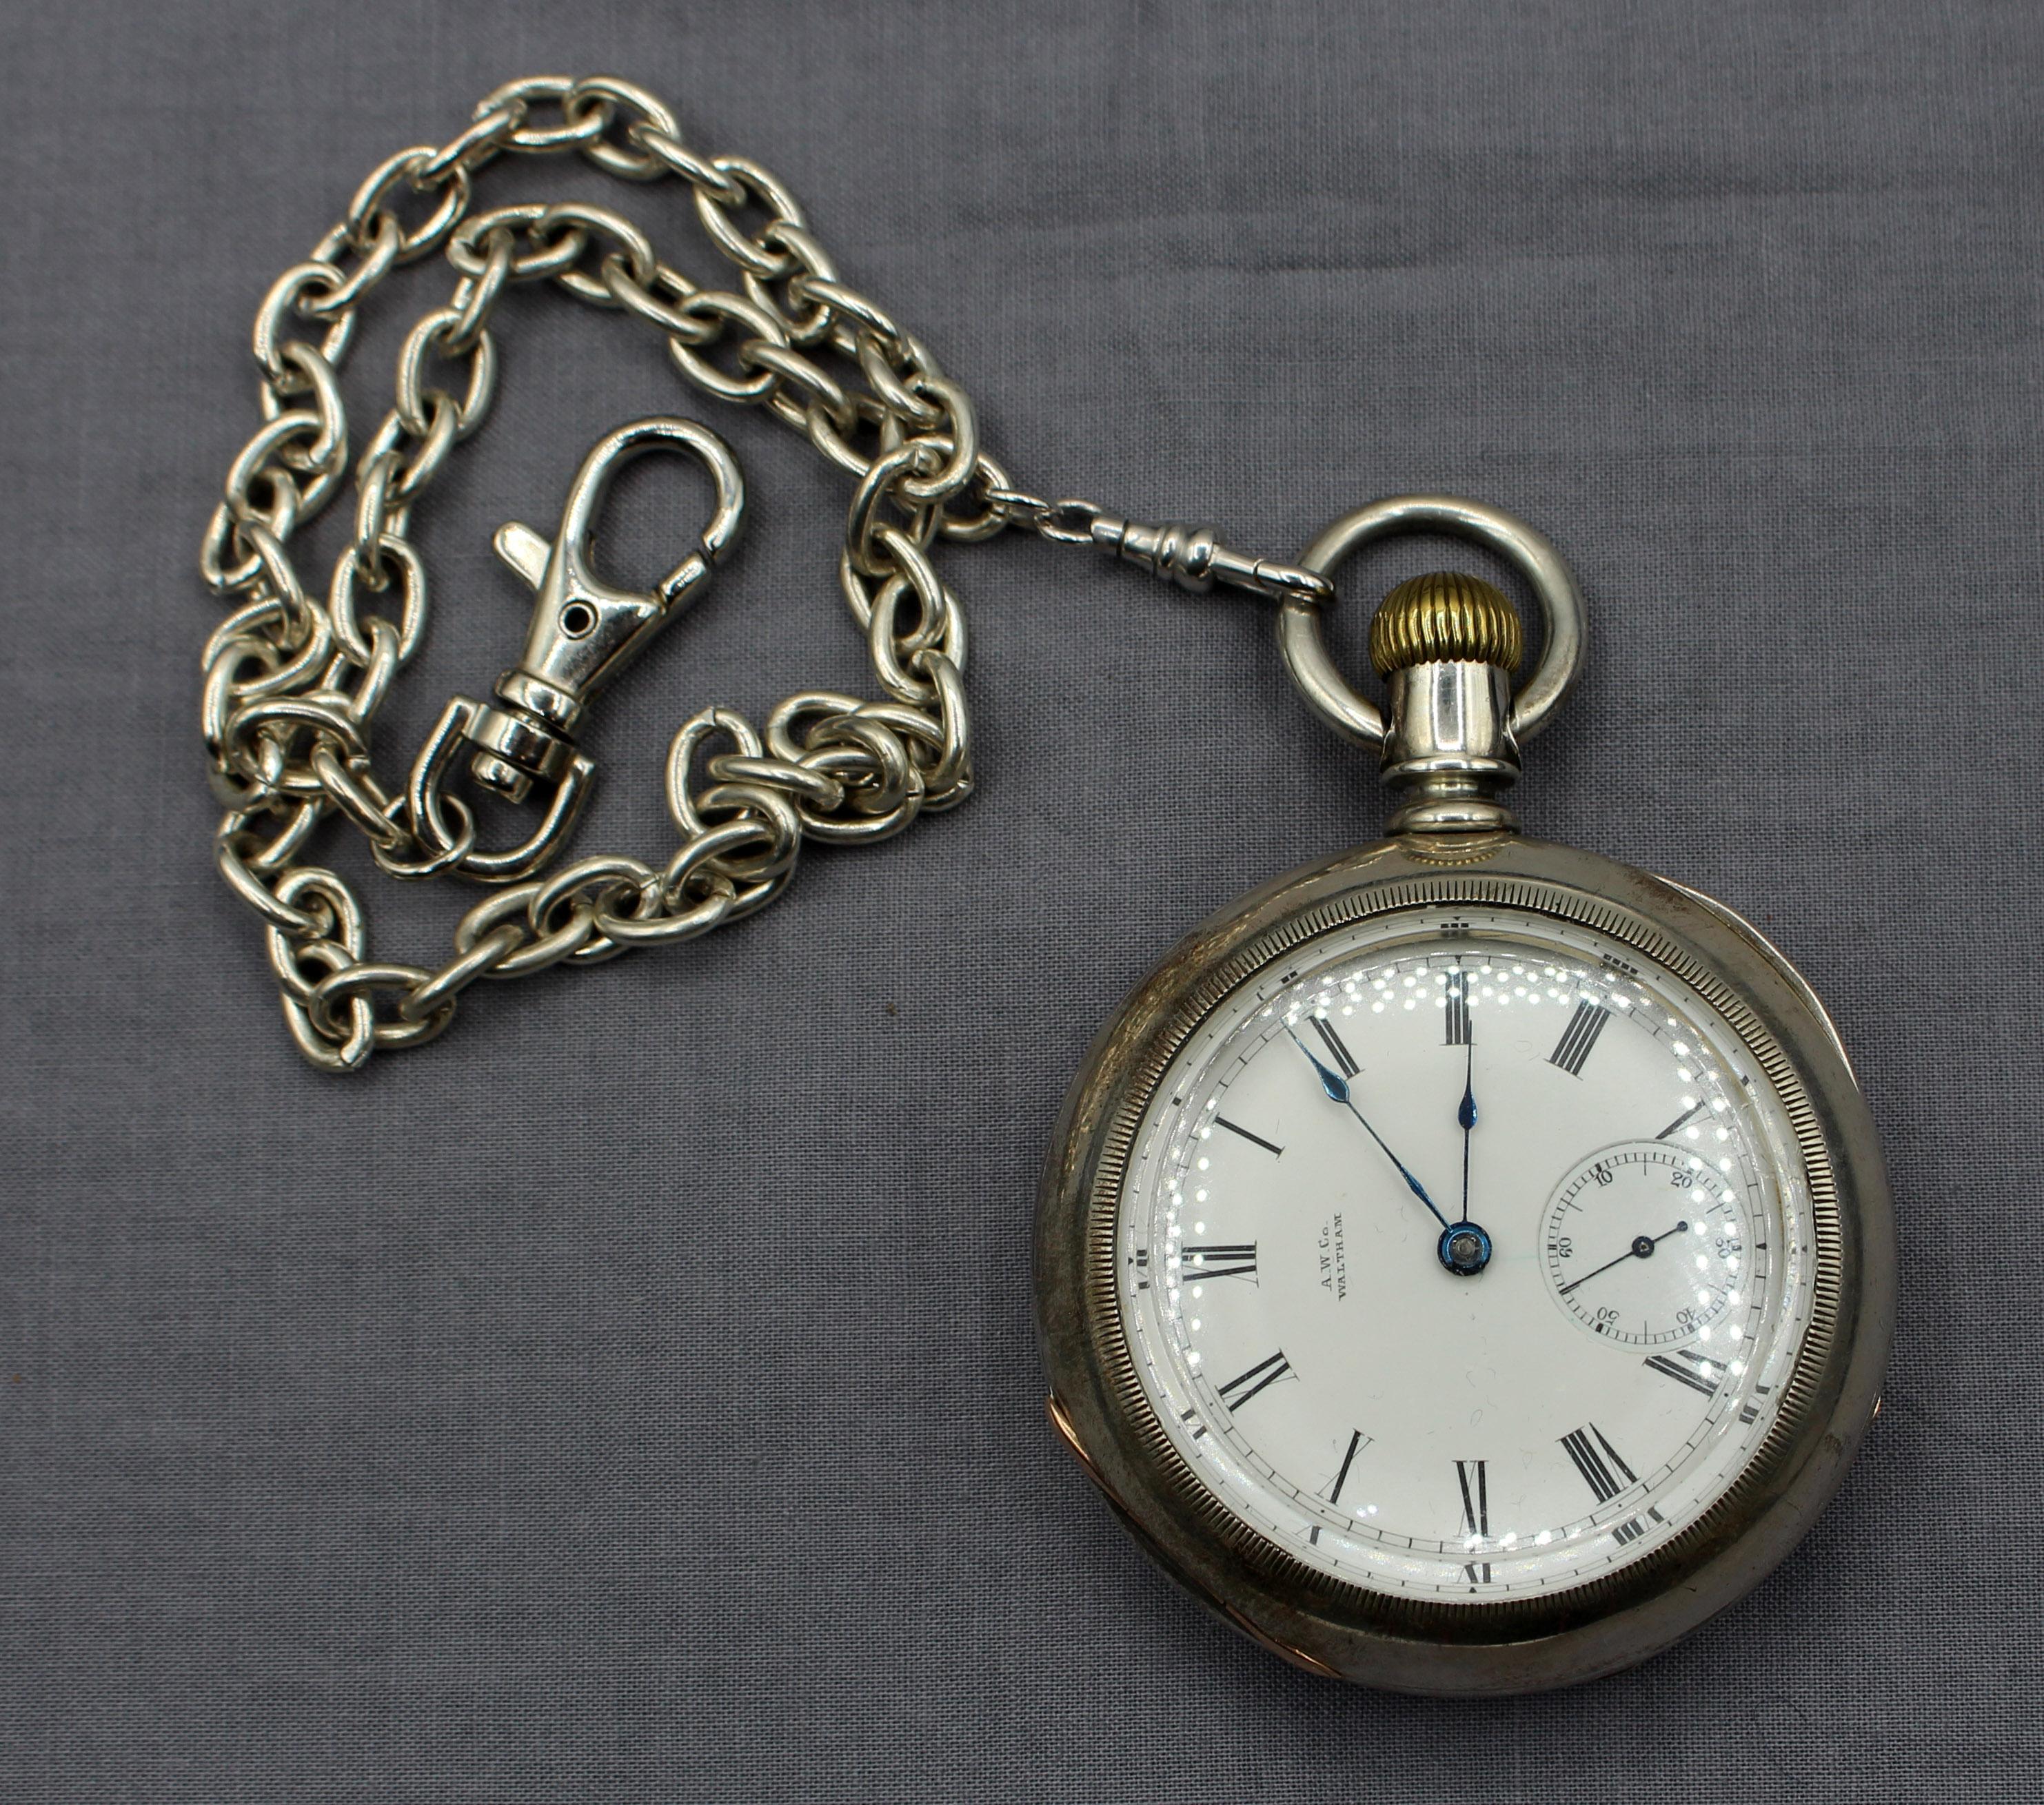 American Watch Co large open face coin silver pocket watch, circa 1886. Oversized movement & second hand. American Watch Co, P.S. Bartlett, Waltham, Mass #2969576. 60mm dia. case by Leader (Keystone Watch Case Co). With later plated chain. Known as